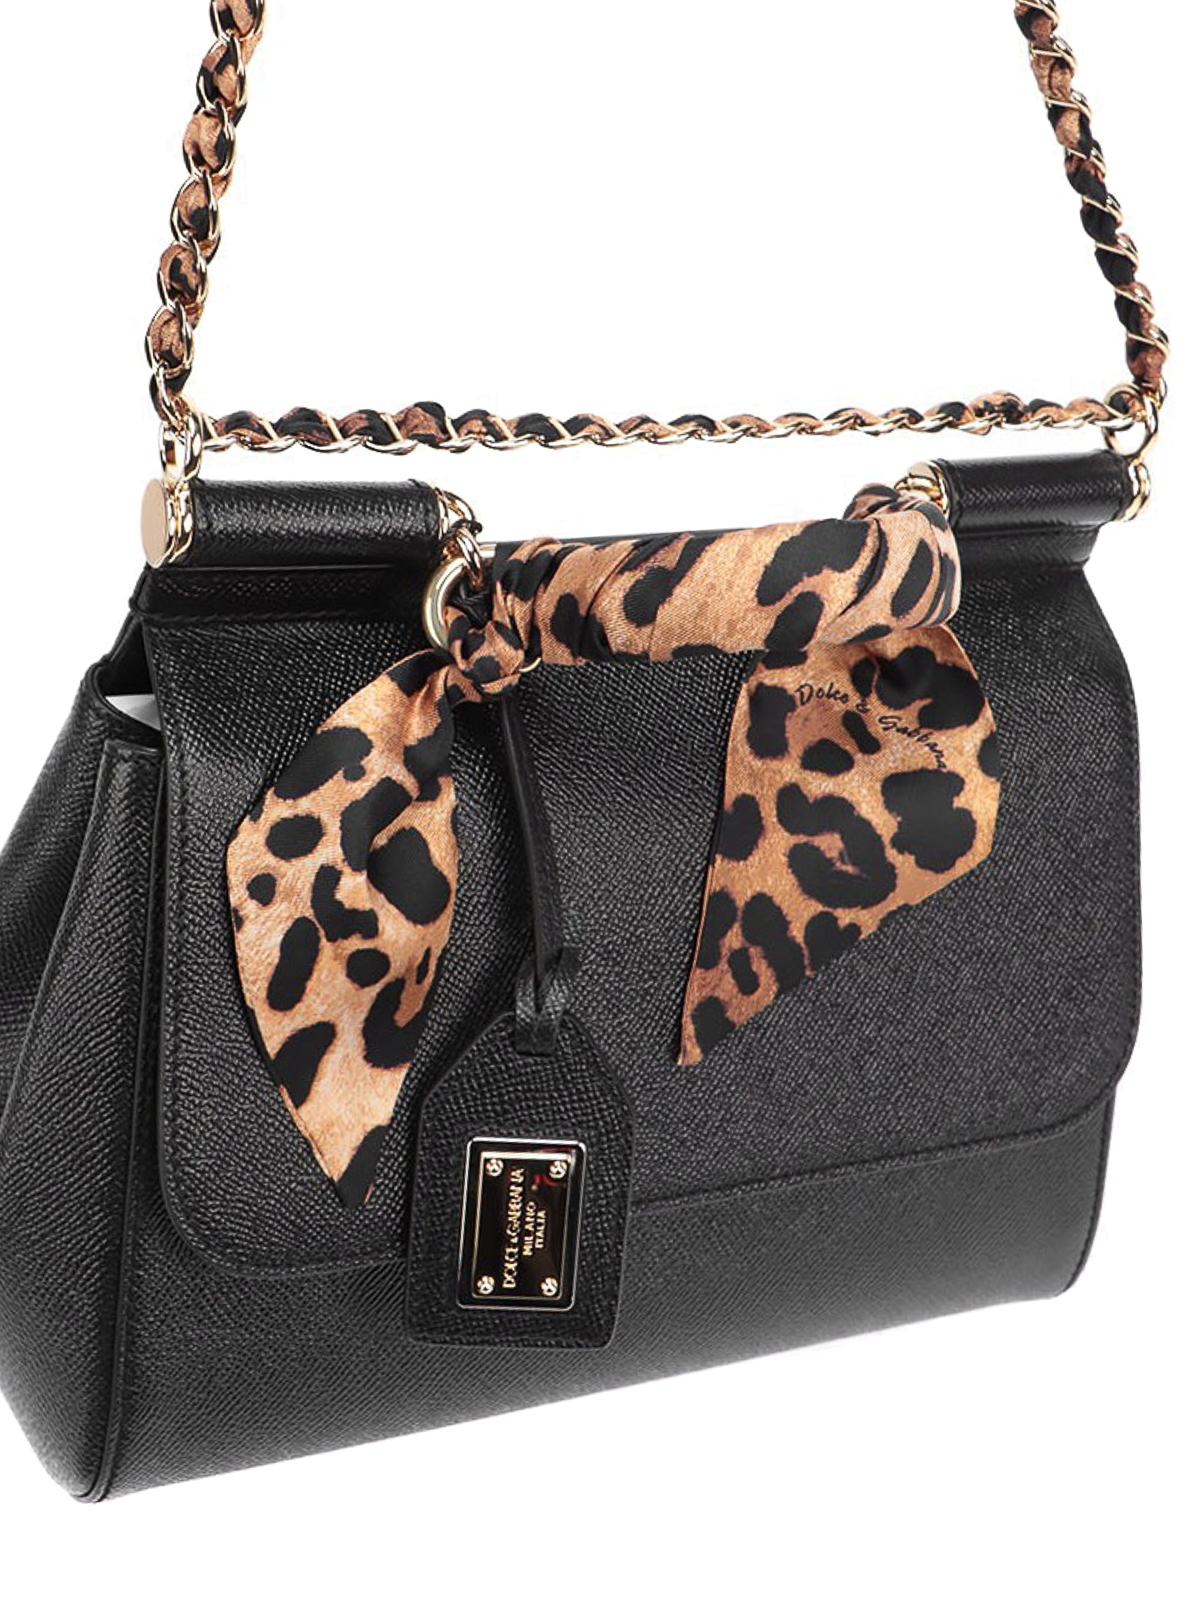 Dolce & Gabbana Small Sicily Bag With Scarf in Black